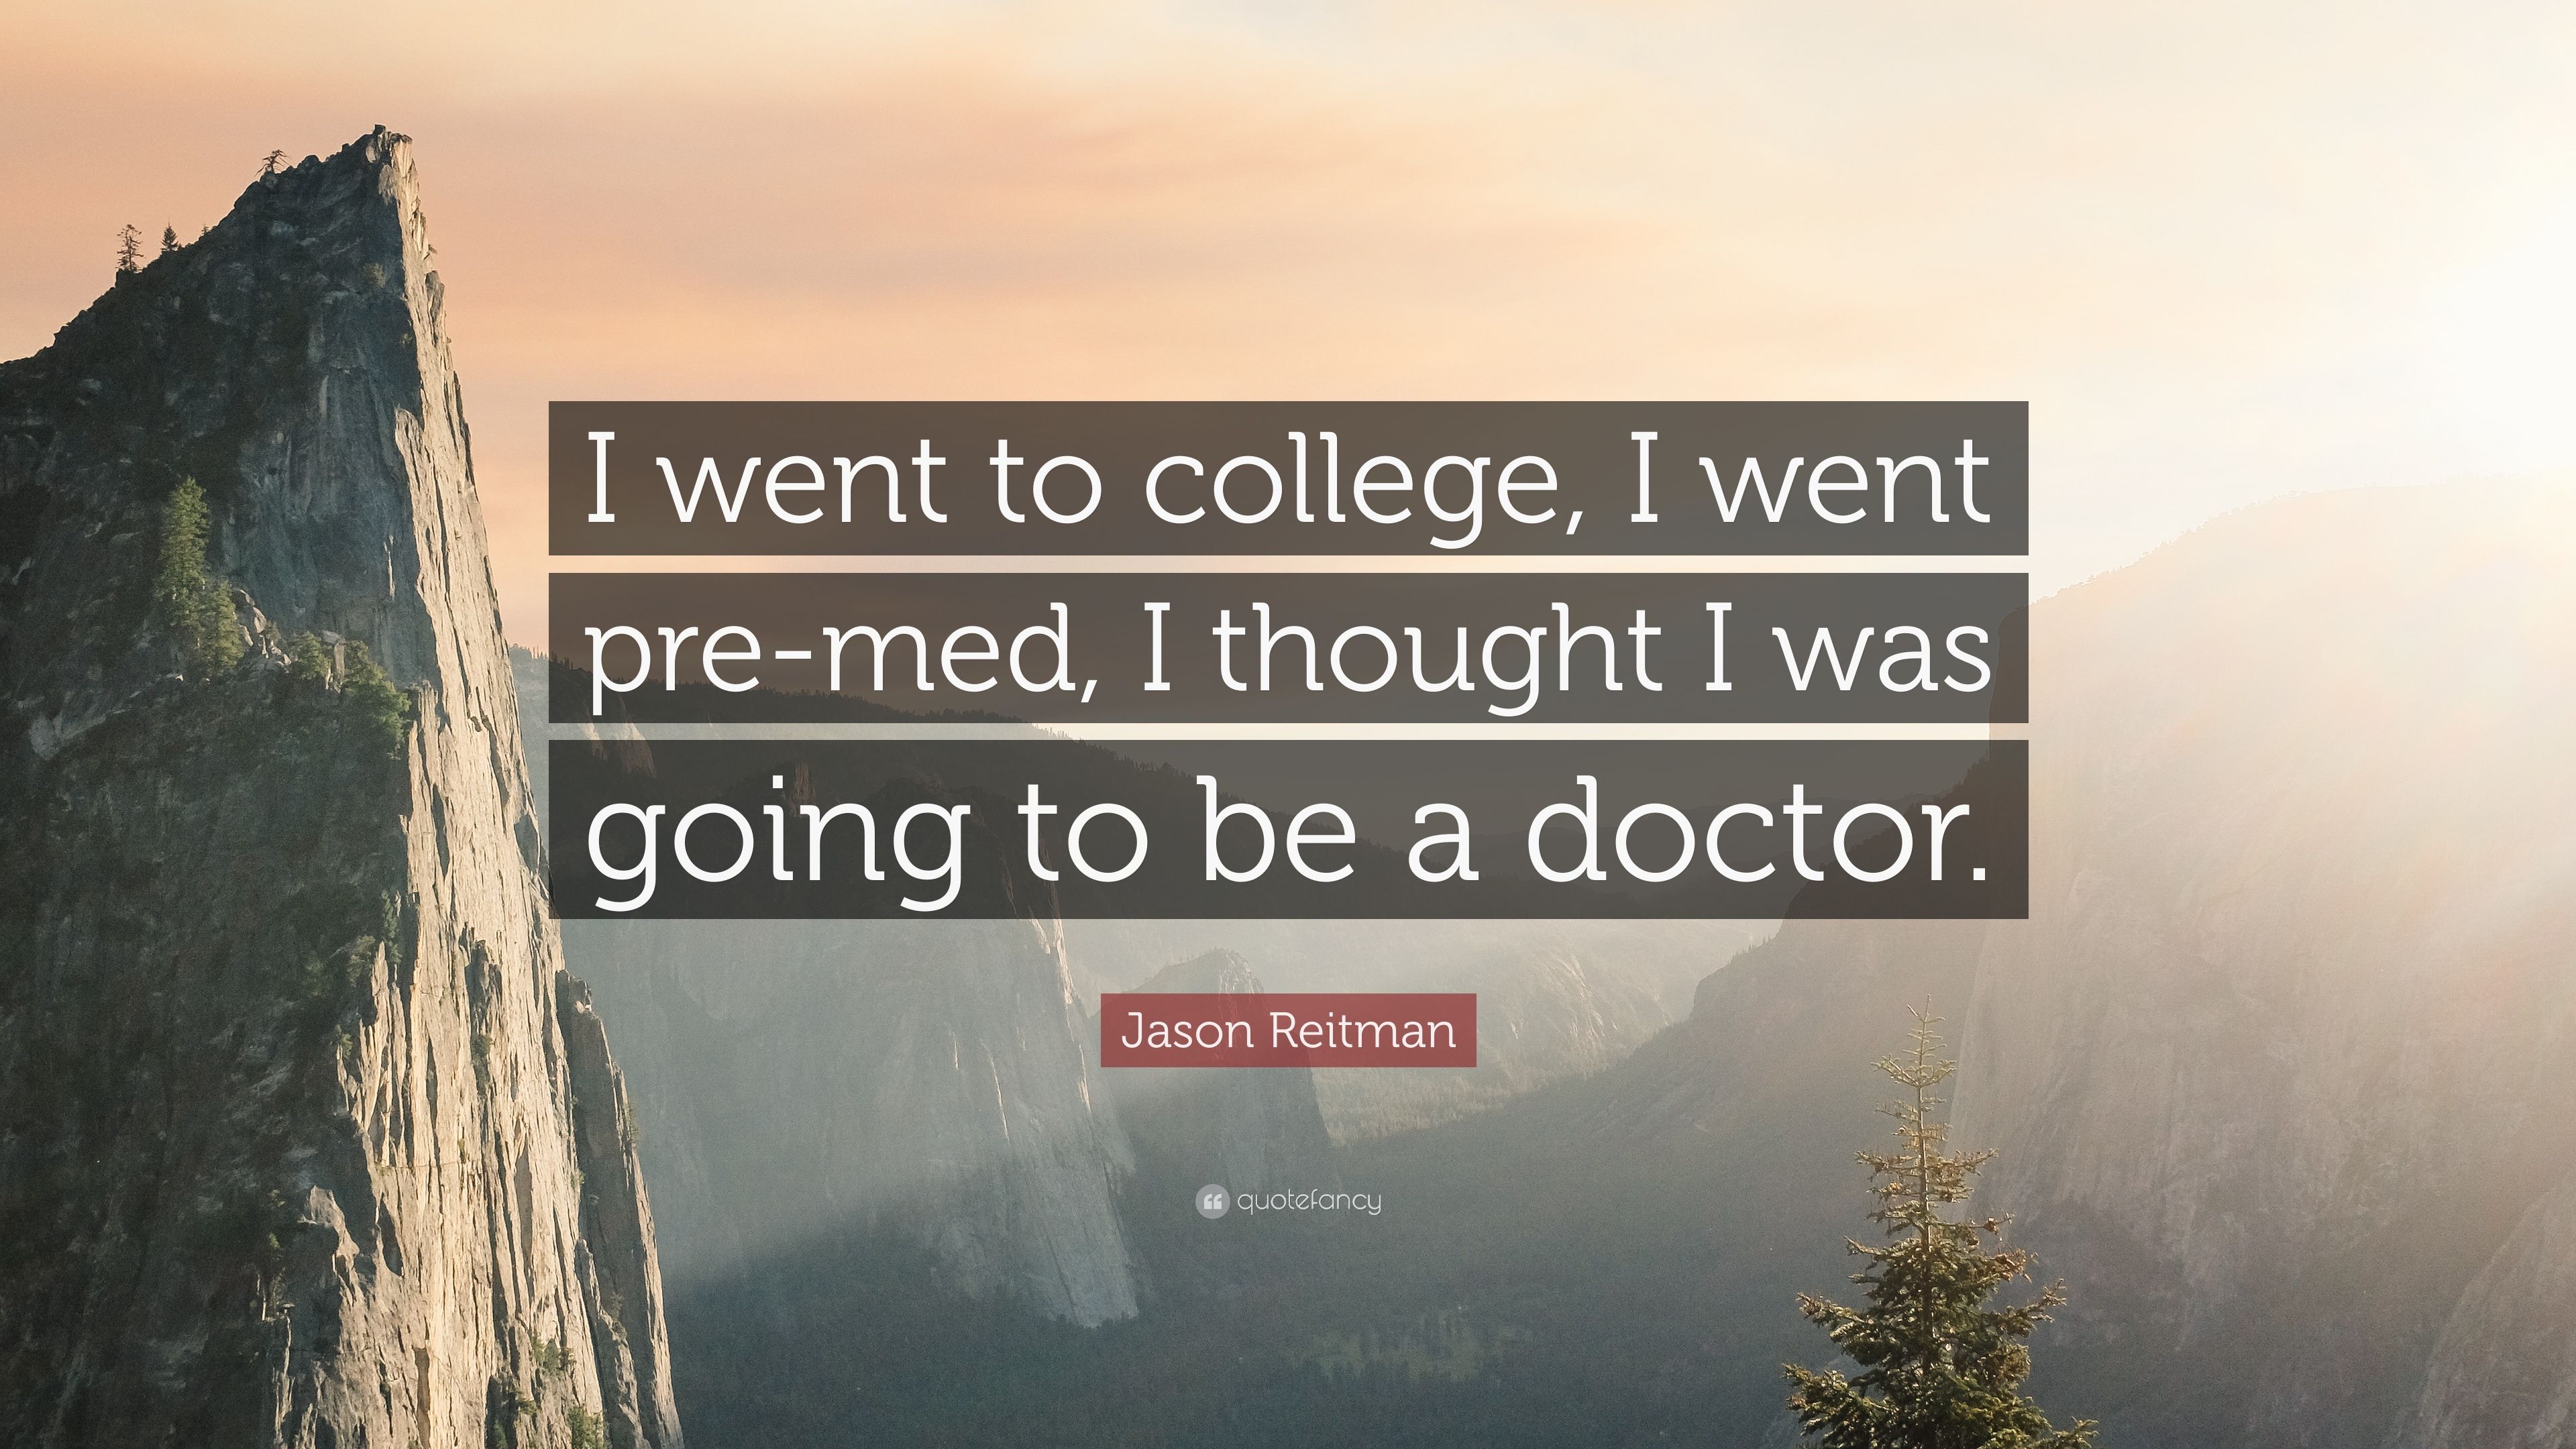 Jason Reitman Quote: “I Went To College, I Went Pre Med, I Thought